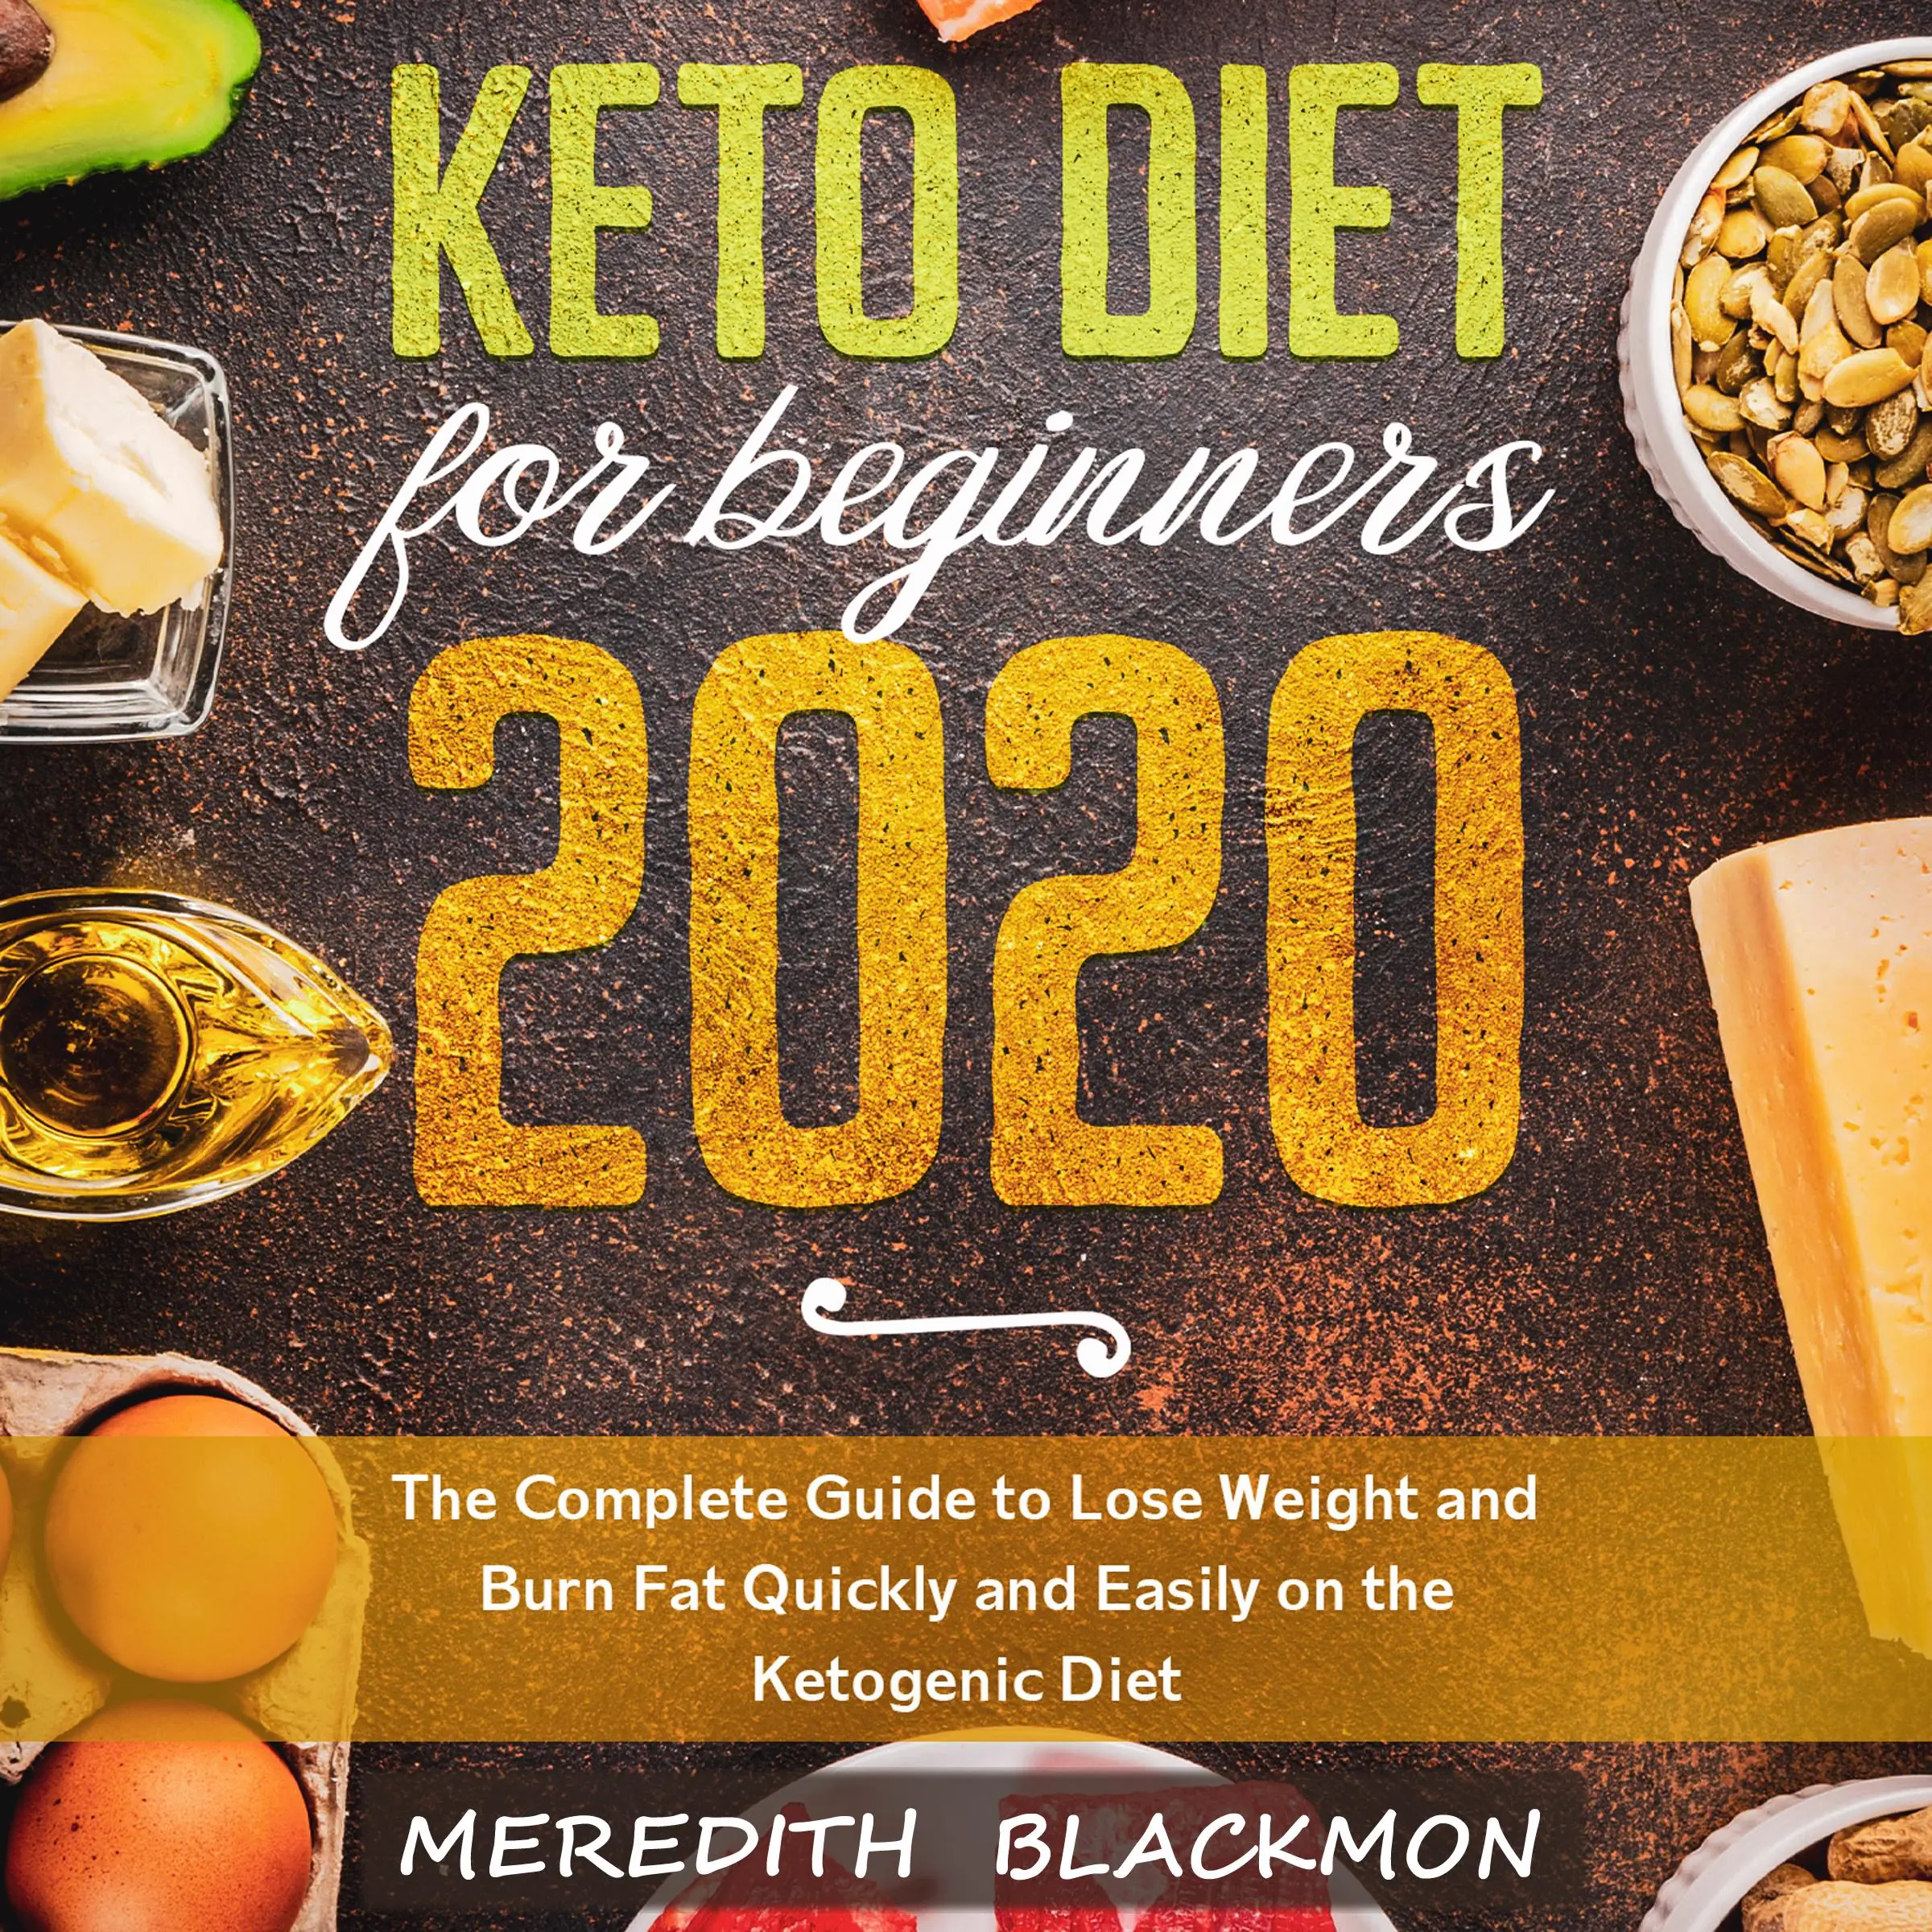 Keto Diet for Beginners 2020: The Complete Guide to Lose Weight and Burn Fat Quickly and Easily on the Ketogenic Diet Audiobook by Meredith Blackmon